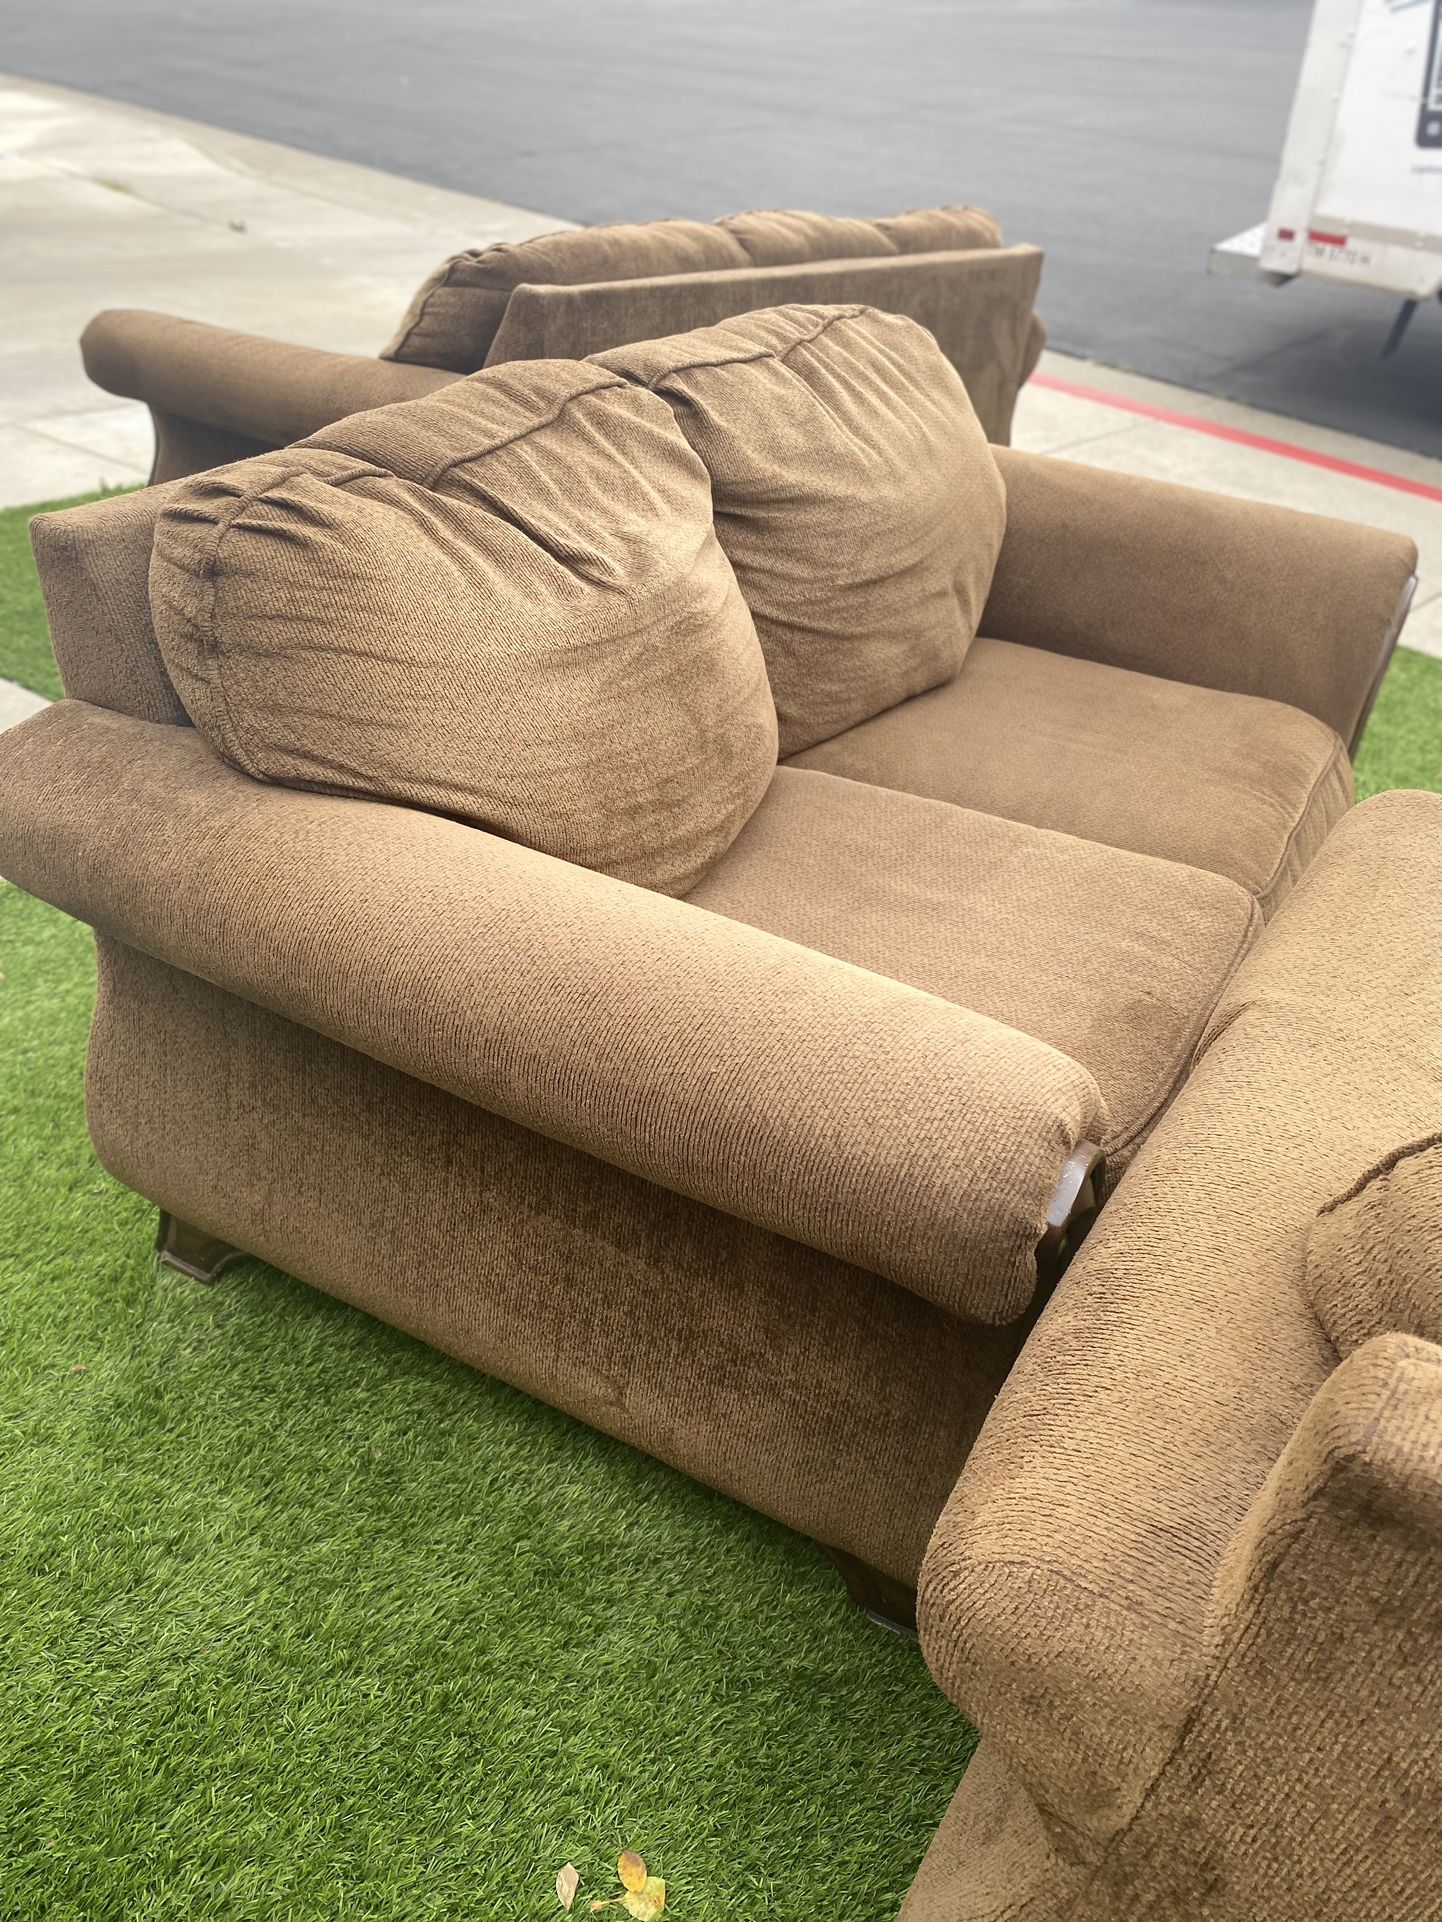 Clean Couch,sofa, Oversized Chair With Ottoman Brown Large You Must Pick Up!